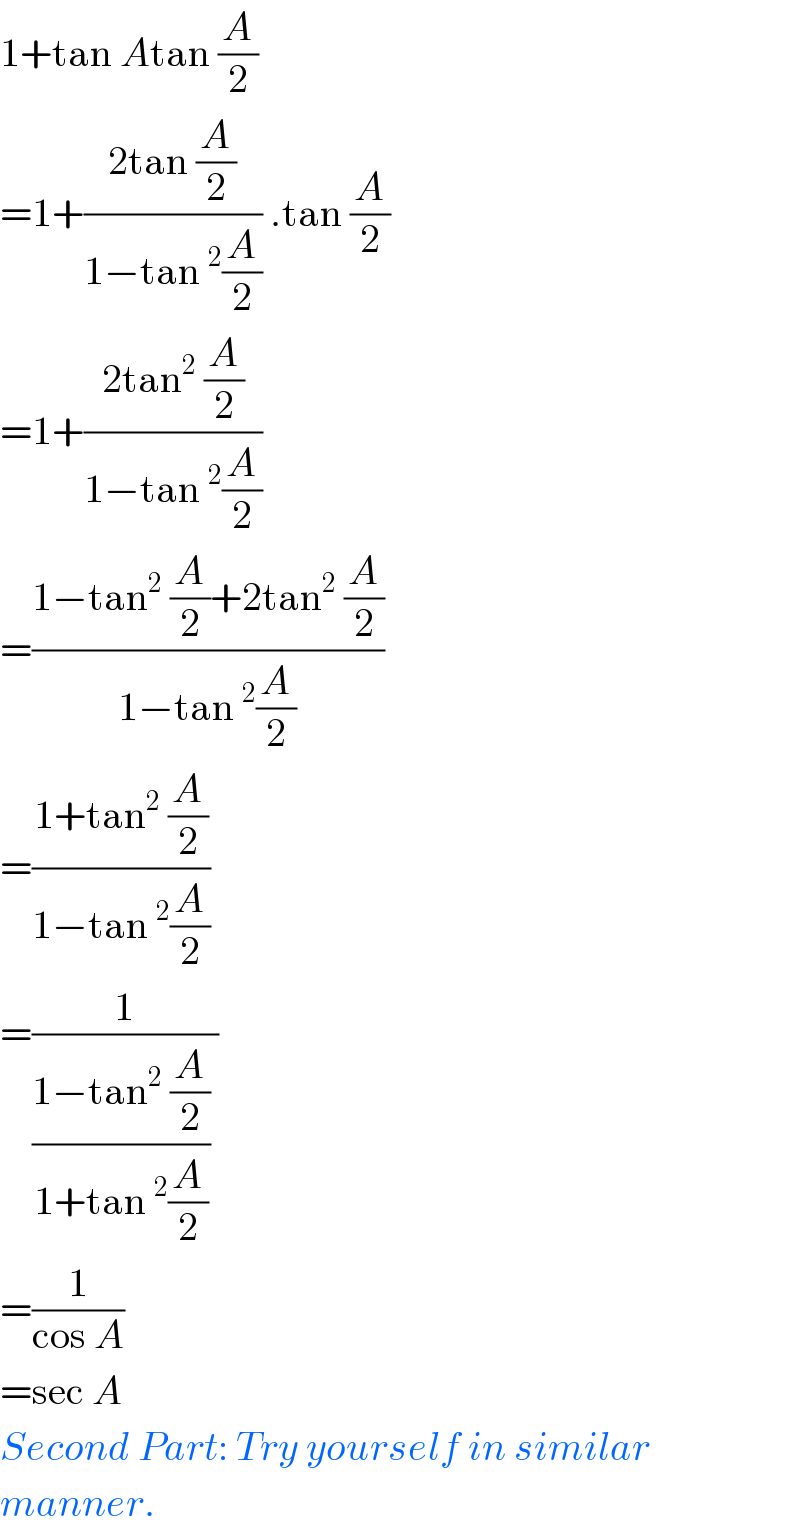 1+tan Atan (A/2)  =1+((2tan (A/2))/(1−tan^2 (A/2))) .tan (A/2)  =1+((2tan^2  (A/2))/(1−tan^2 (A/2)))   =((1−tan^2  (A/2)+2tan^2  (A/2))/(1−tan^2 (A/2)))   =((1+tan^2  (A/2))/(1−tan^2 (A/2)))   =(1/(((1−tan^2  (A/2))/(1+tan^2 (A/2))) ))  =(1/(cos A))  =sec A  Second Part: Try yourself in similar  manner.  